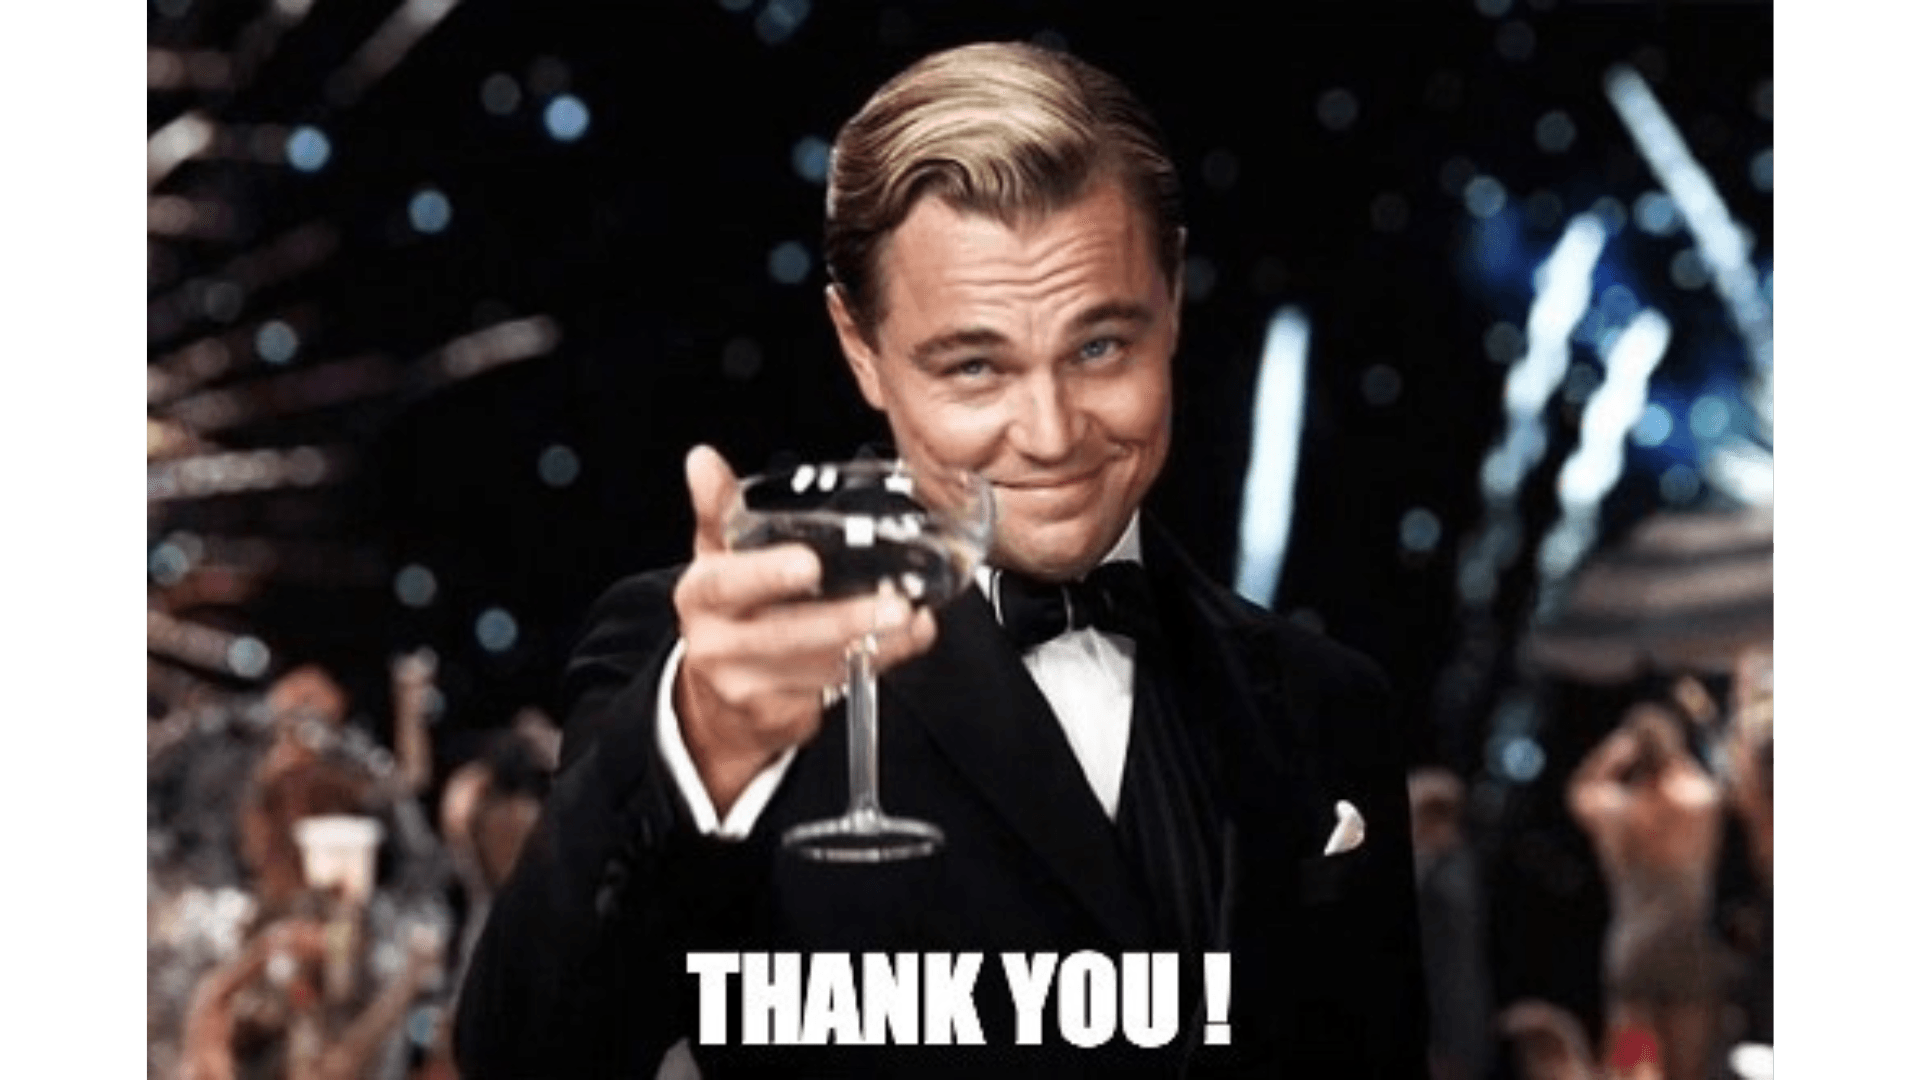 A man in a tuxedo is holding a glass of wine and saying thank you.